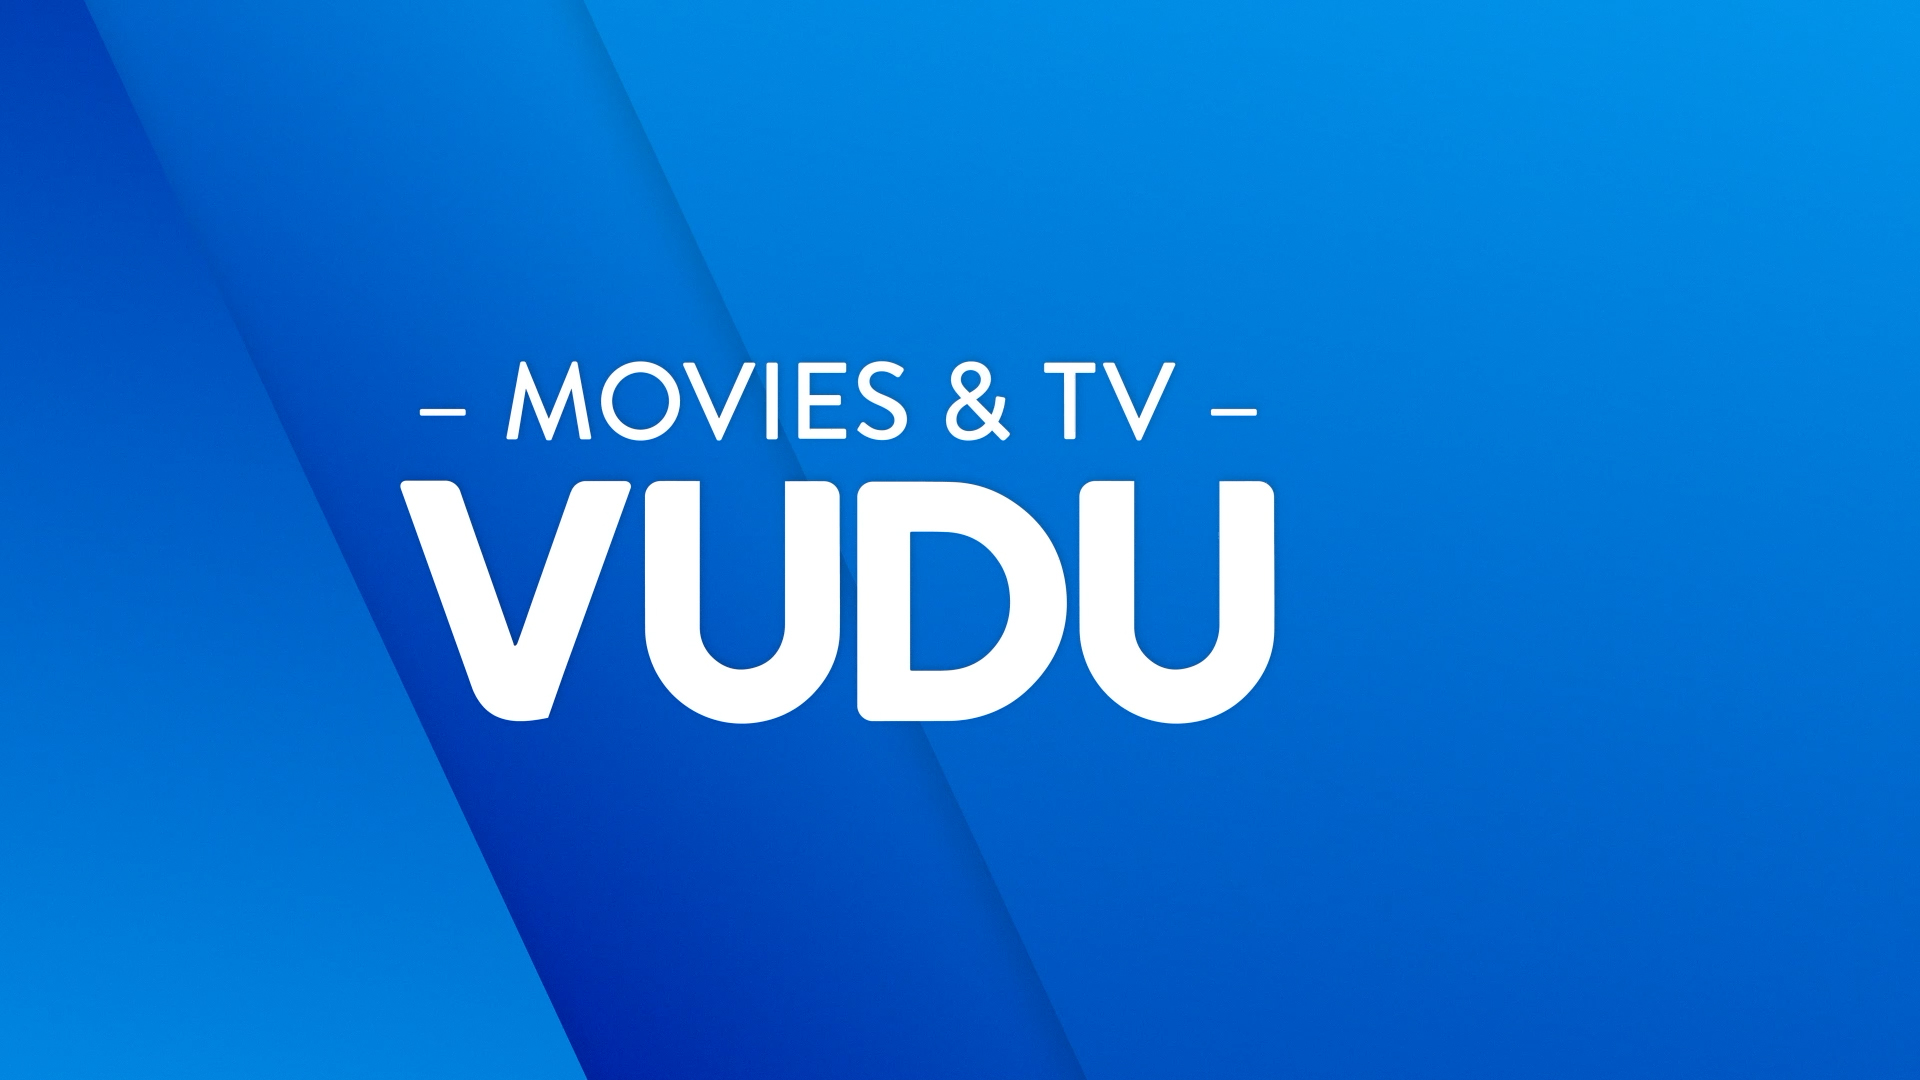 Vudu is Helping You Find Age-Appropriate Kid Movies with Help From Common Sense Media